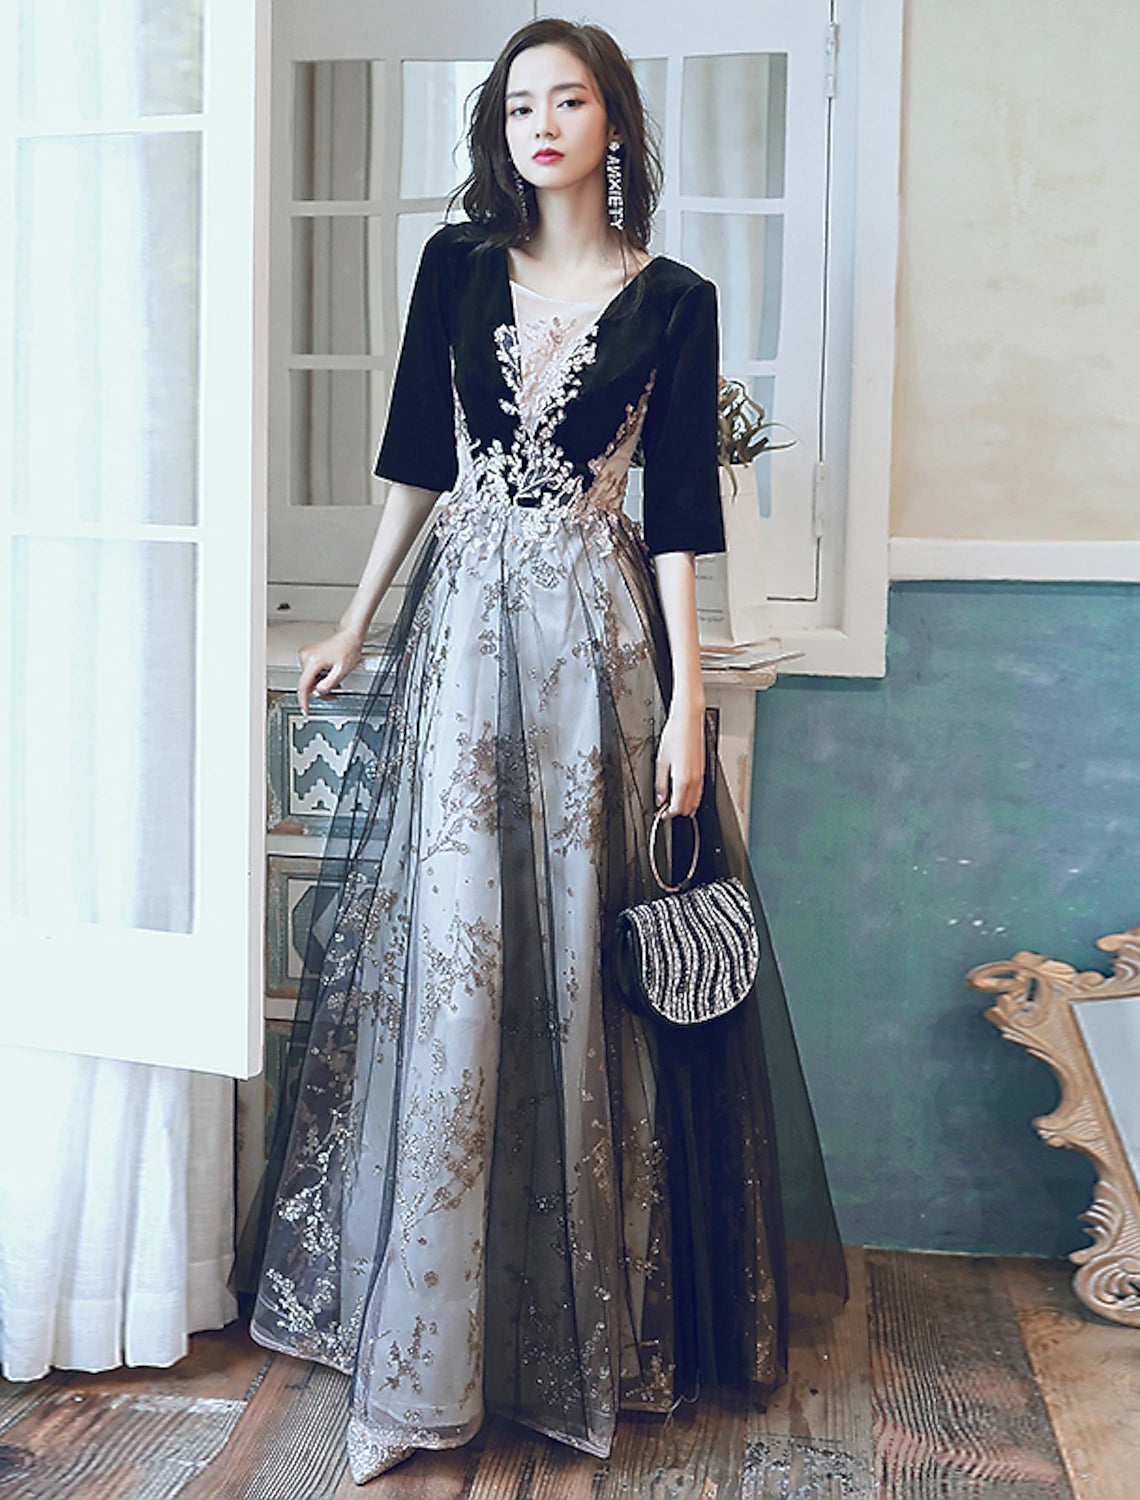 A-Line Glittering Cut Out Party Wear Formal Evening Dress Illusion Neck Half Sleeve Floor Length Velvet with Sequin Appliques